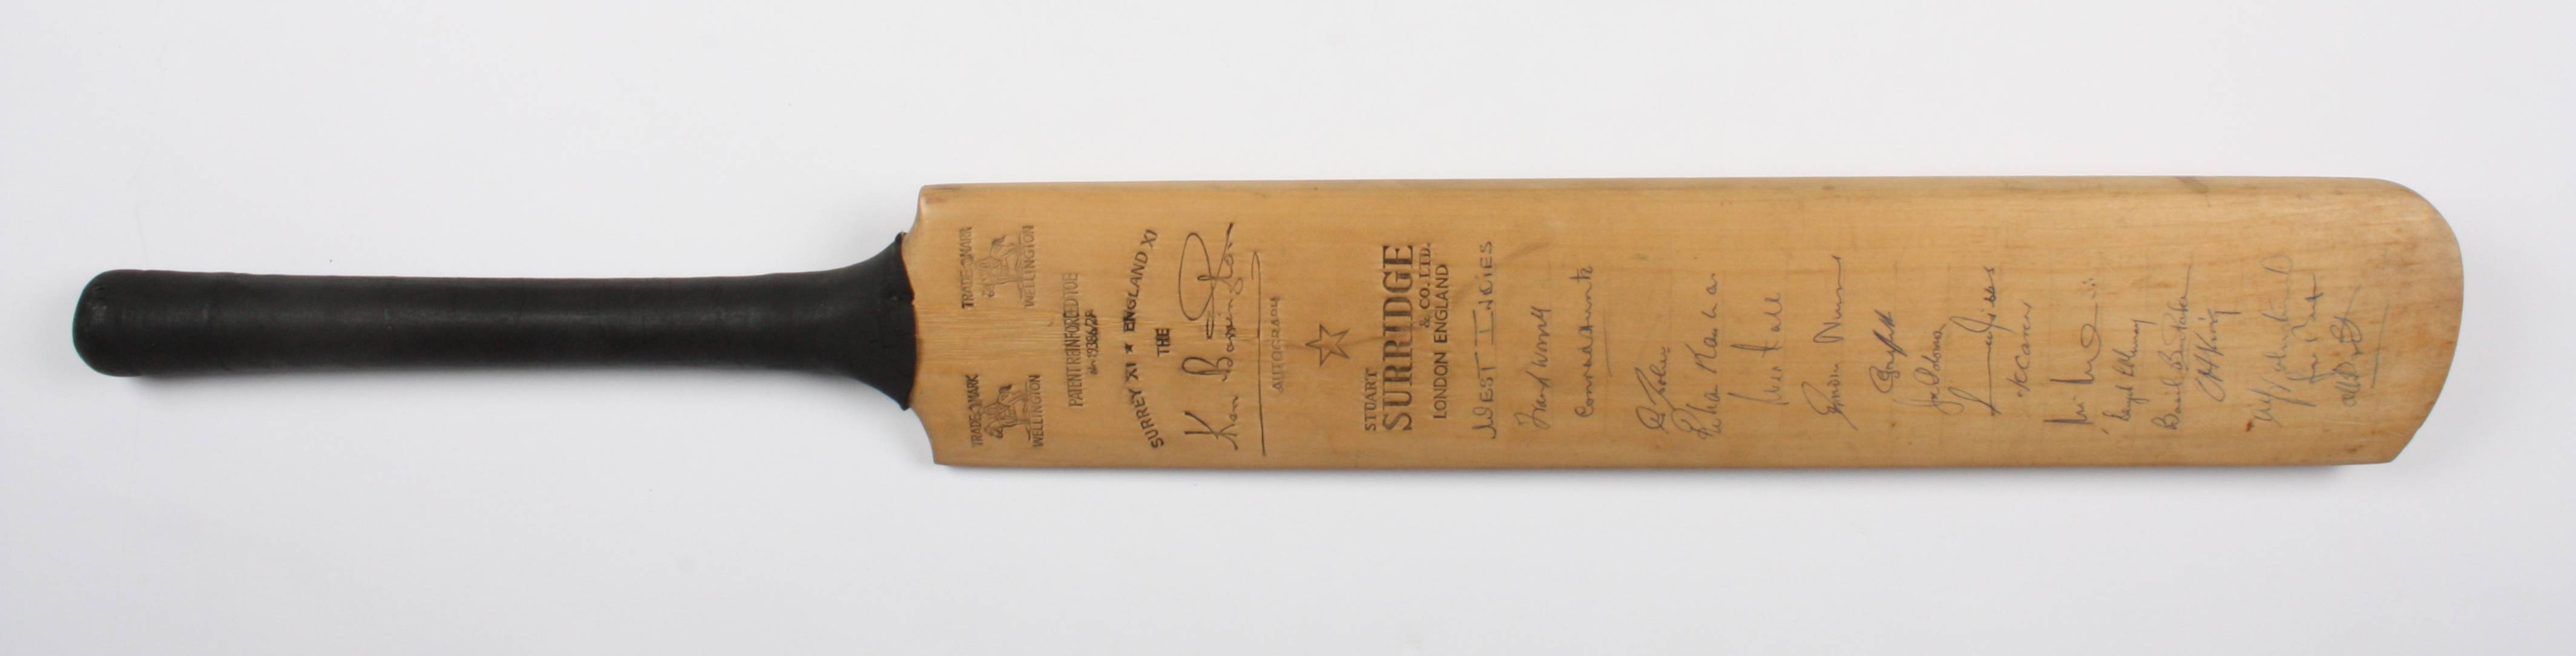 A 1960s signed Surridge cricket bat
signed by The West Indies, England, Surrey, Hampshire, Essex, - Image 3 of 4